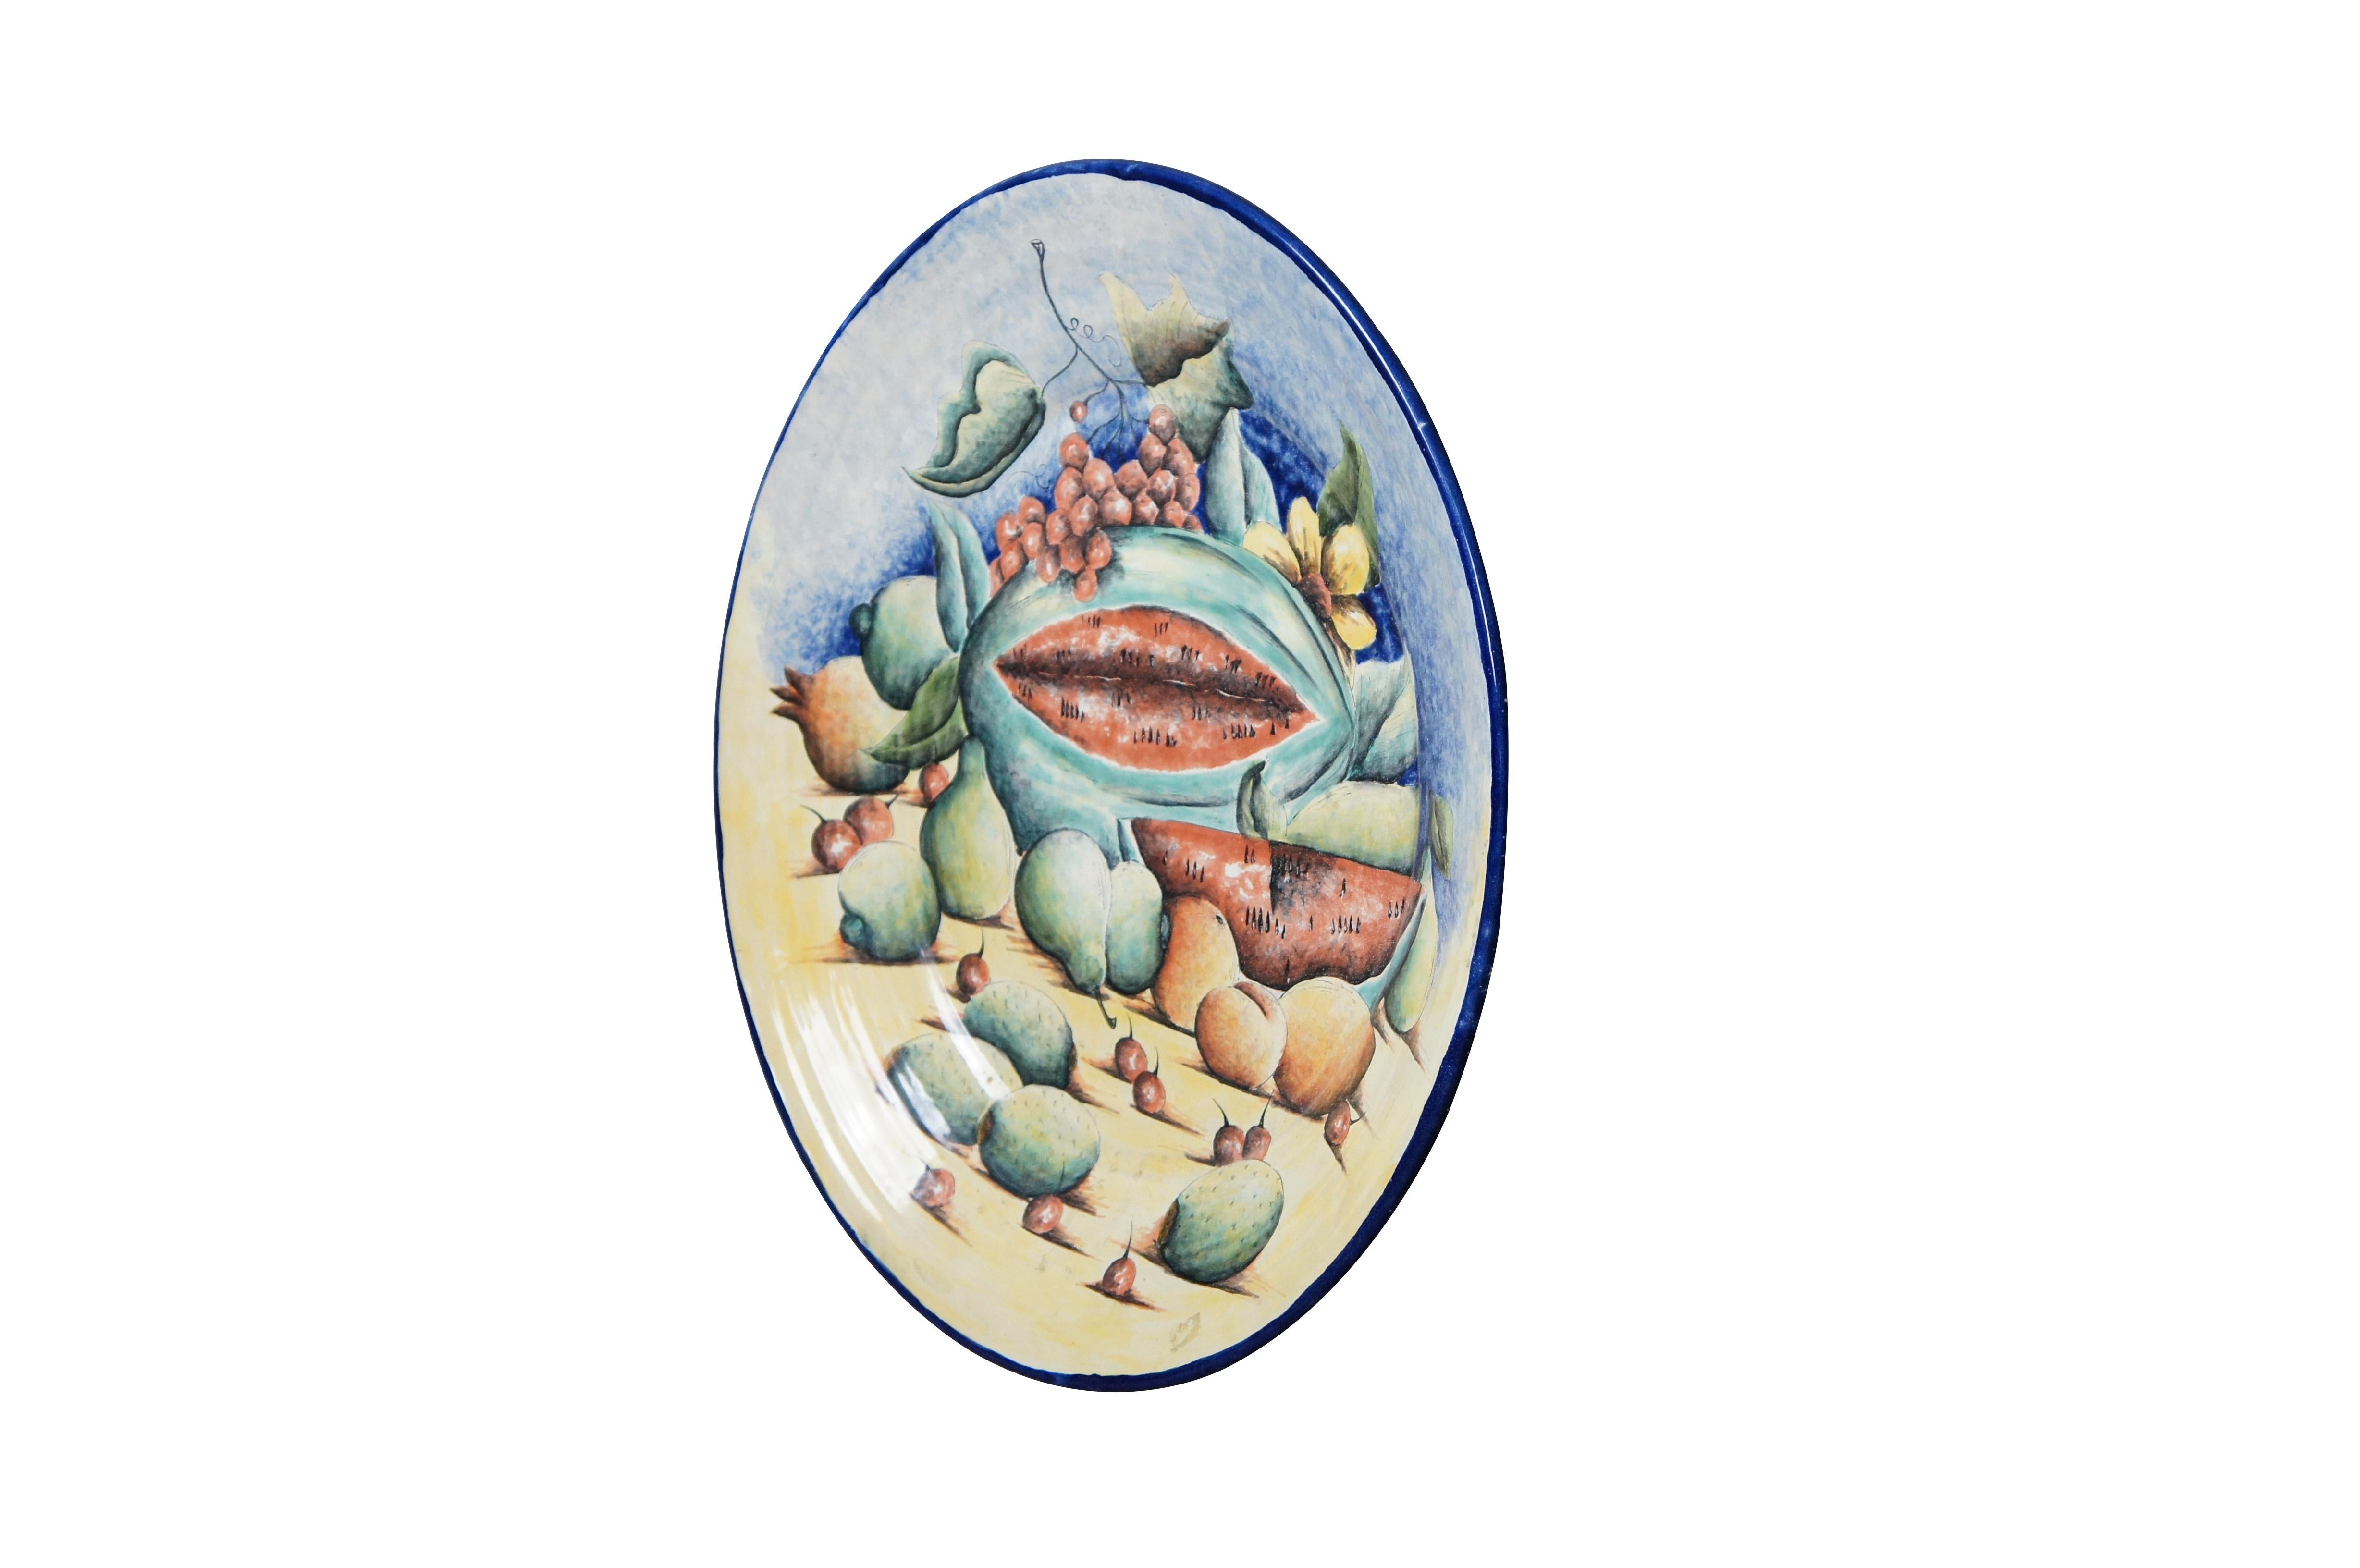 A beautiful 20th century Majolica Platter / Decorative Wall Plate. Made in Santa Rosa de Lima (Villagrán), Guanajuato. Features a hand painted still life of watermelon and other fruit. The foreground of the plate is blue along the top with a sand